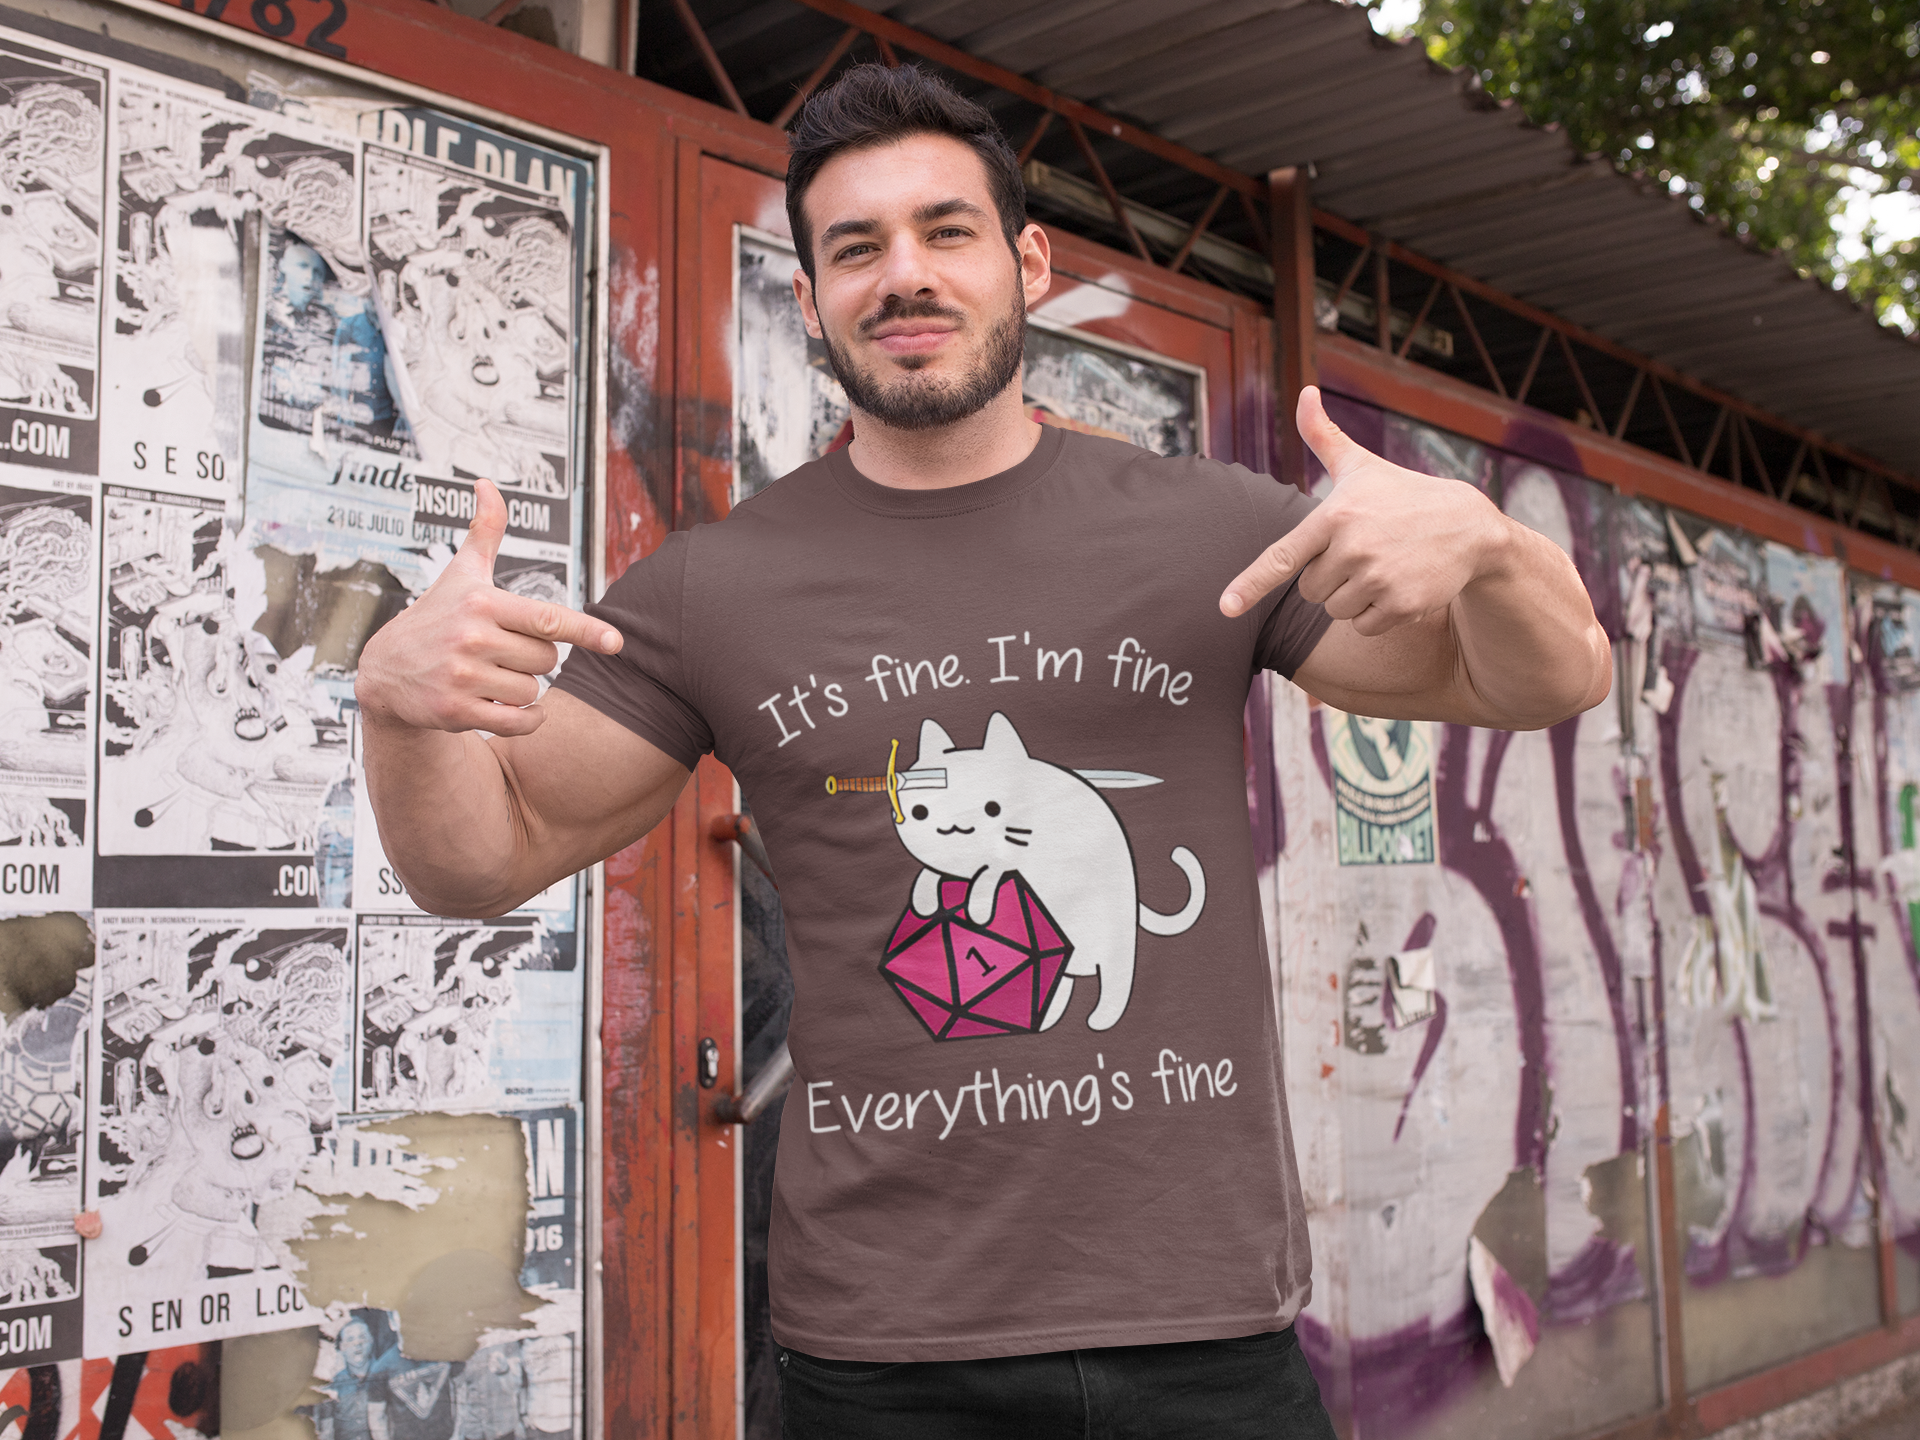 Dungeon And Dragon T Shirt, RPG Dice Games Tshirt, DND Cat Its Fine Im Fine Everythings Fine T Shirt